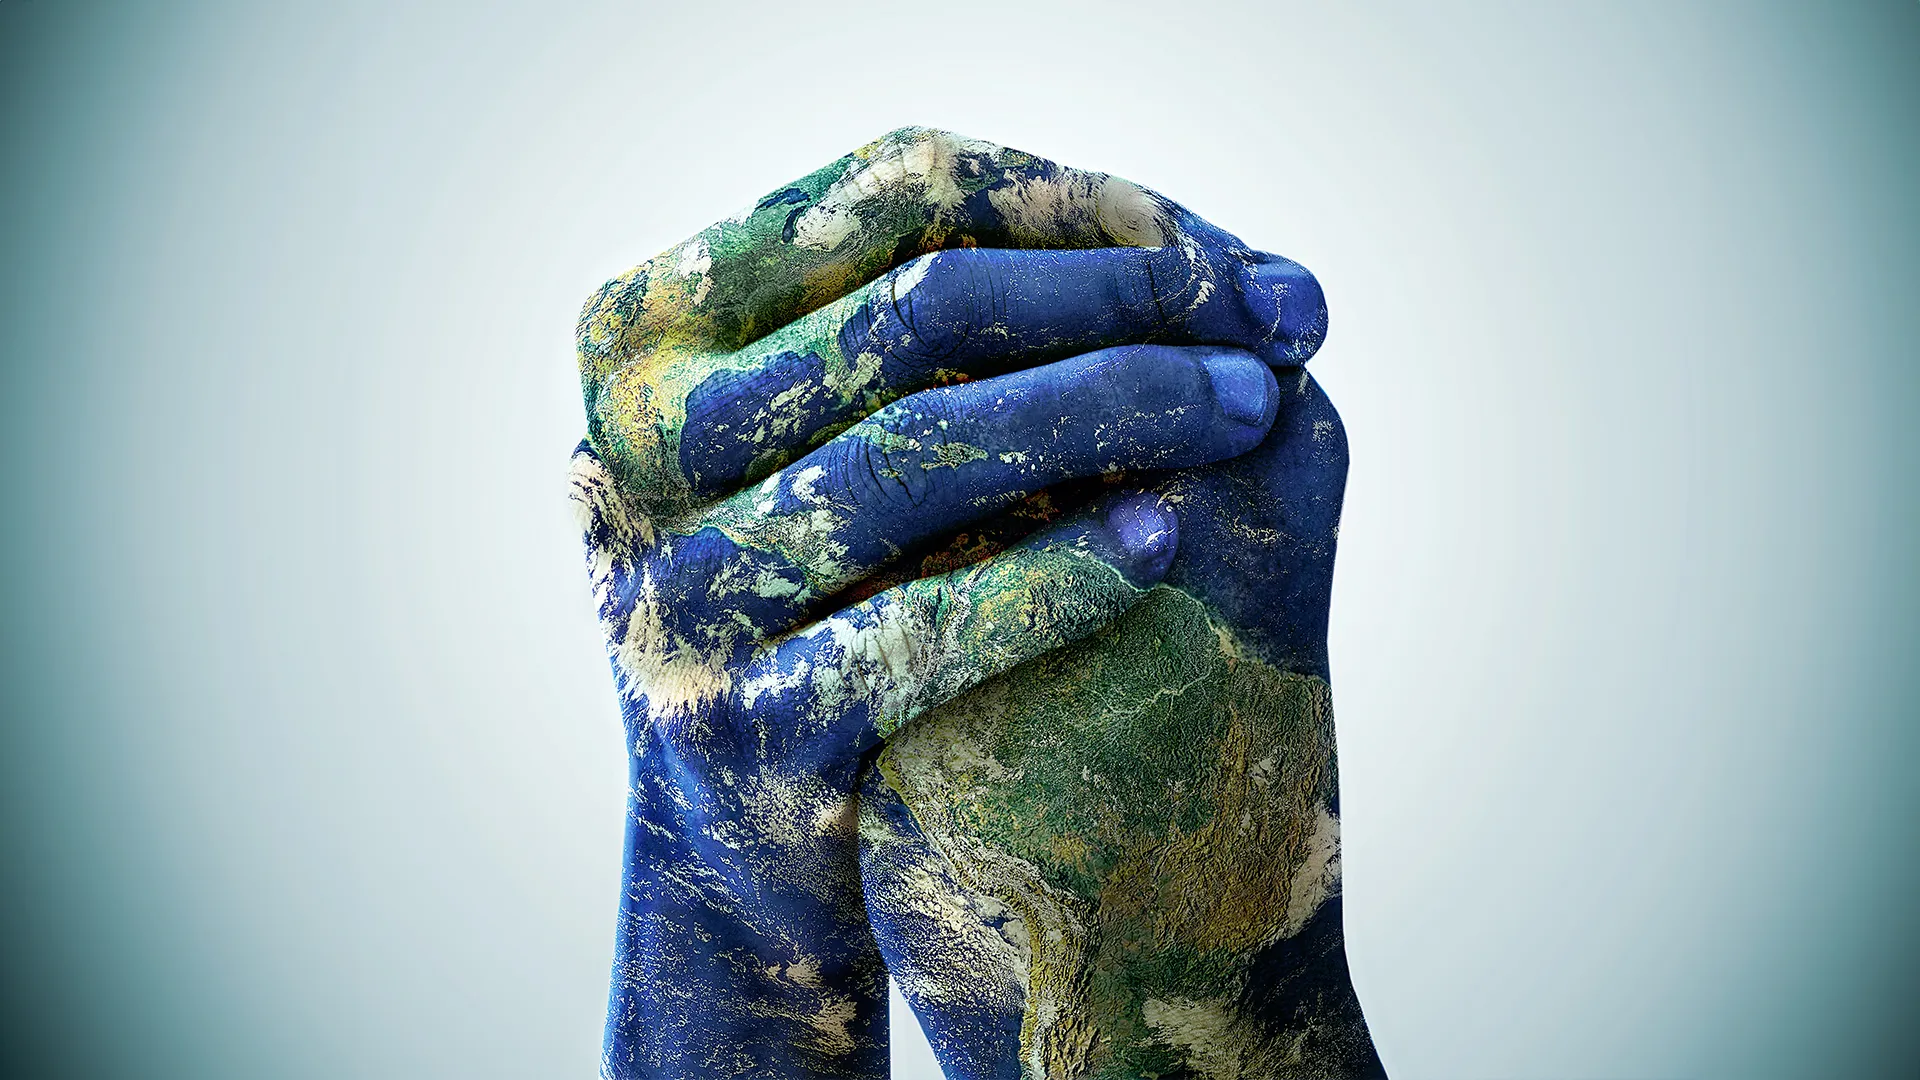 Two hands clasped together, painted to resemble the Earth's surface with details including blue oceans and green-brown land masses, symbolizing unity and global cooperation, set against a light blue background.